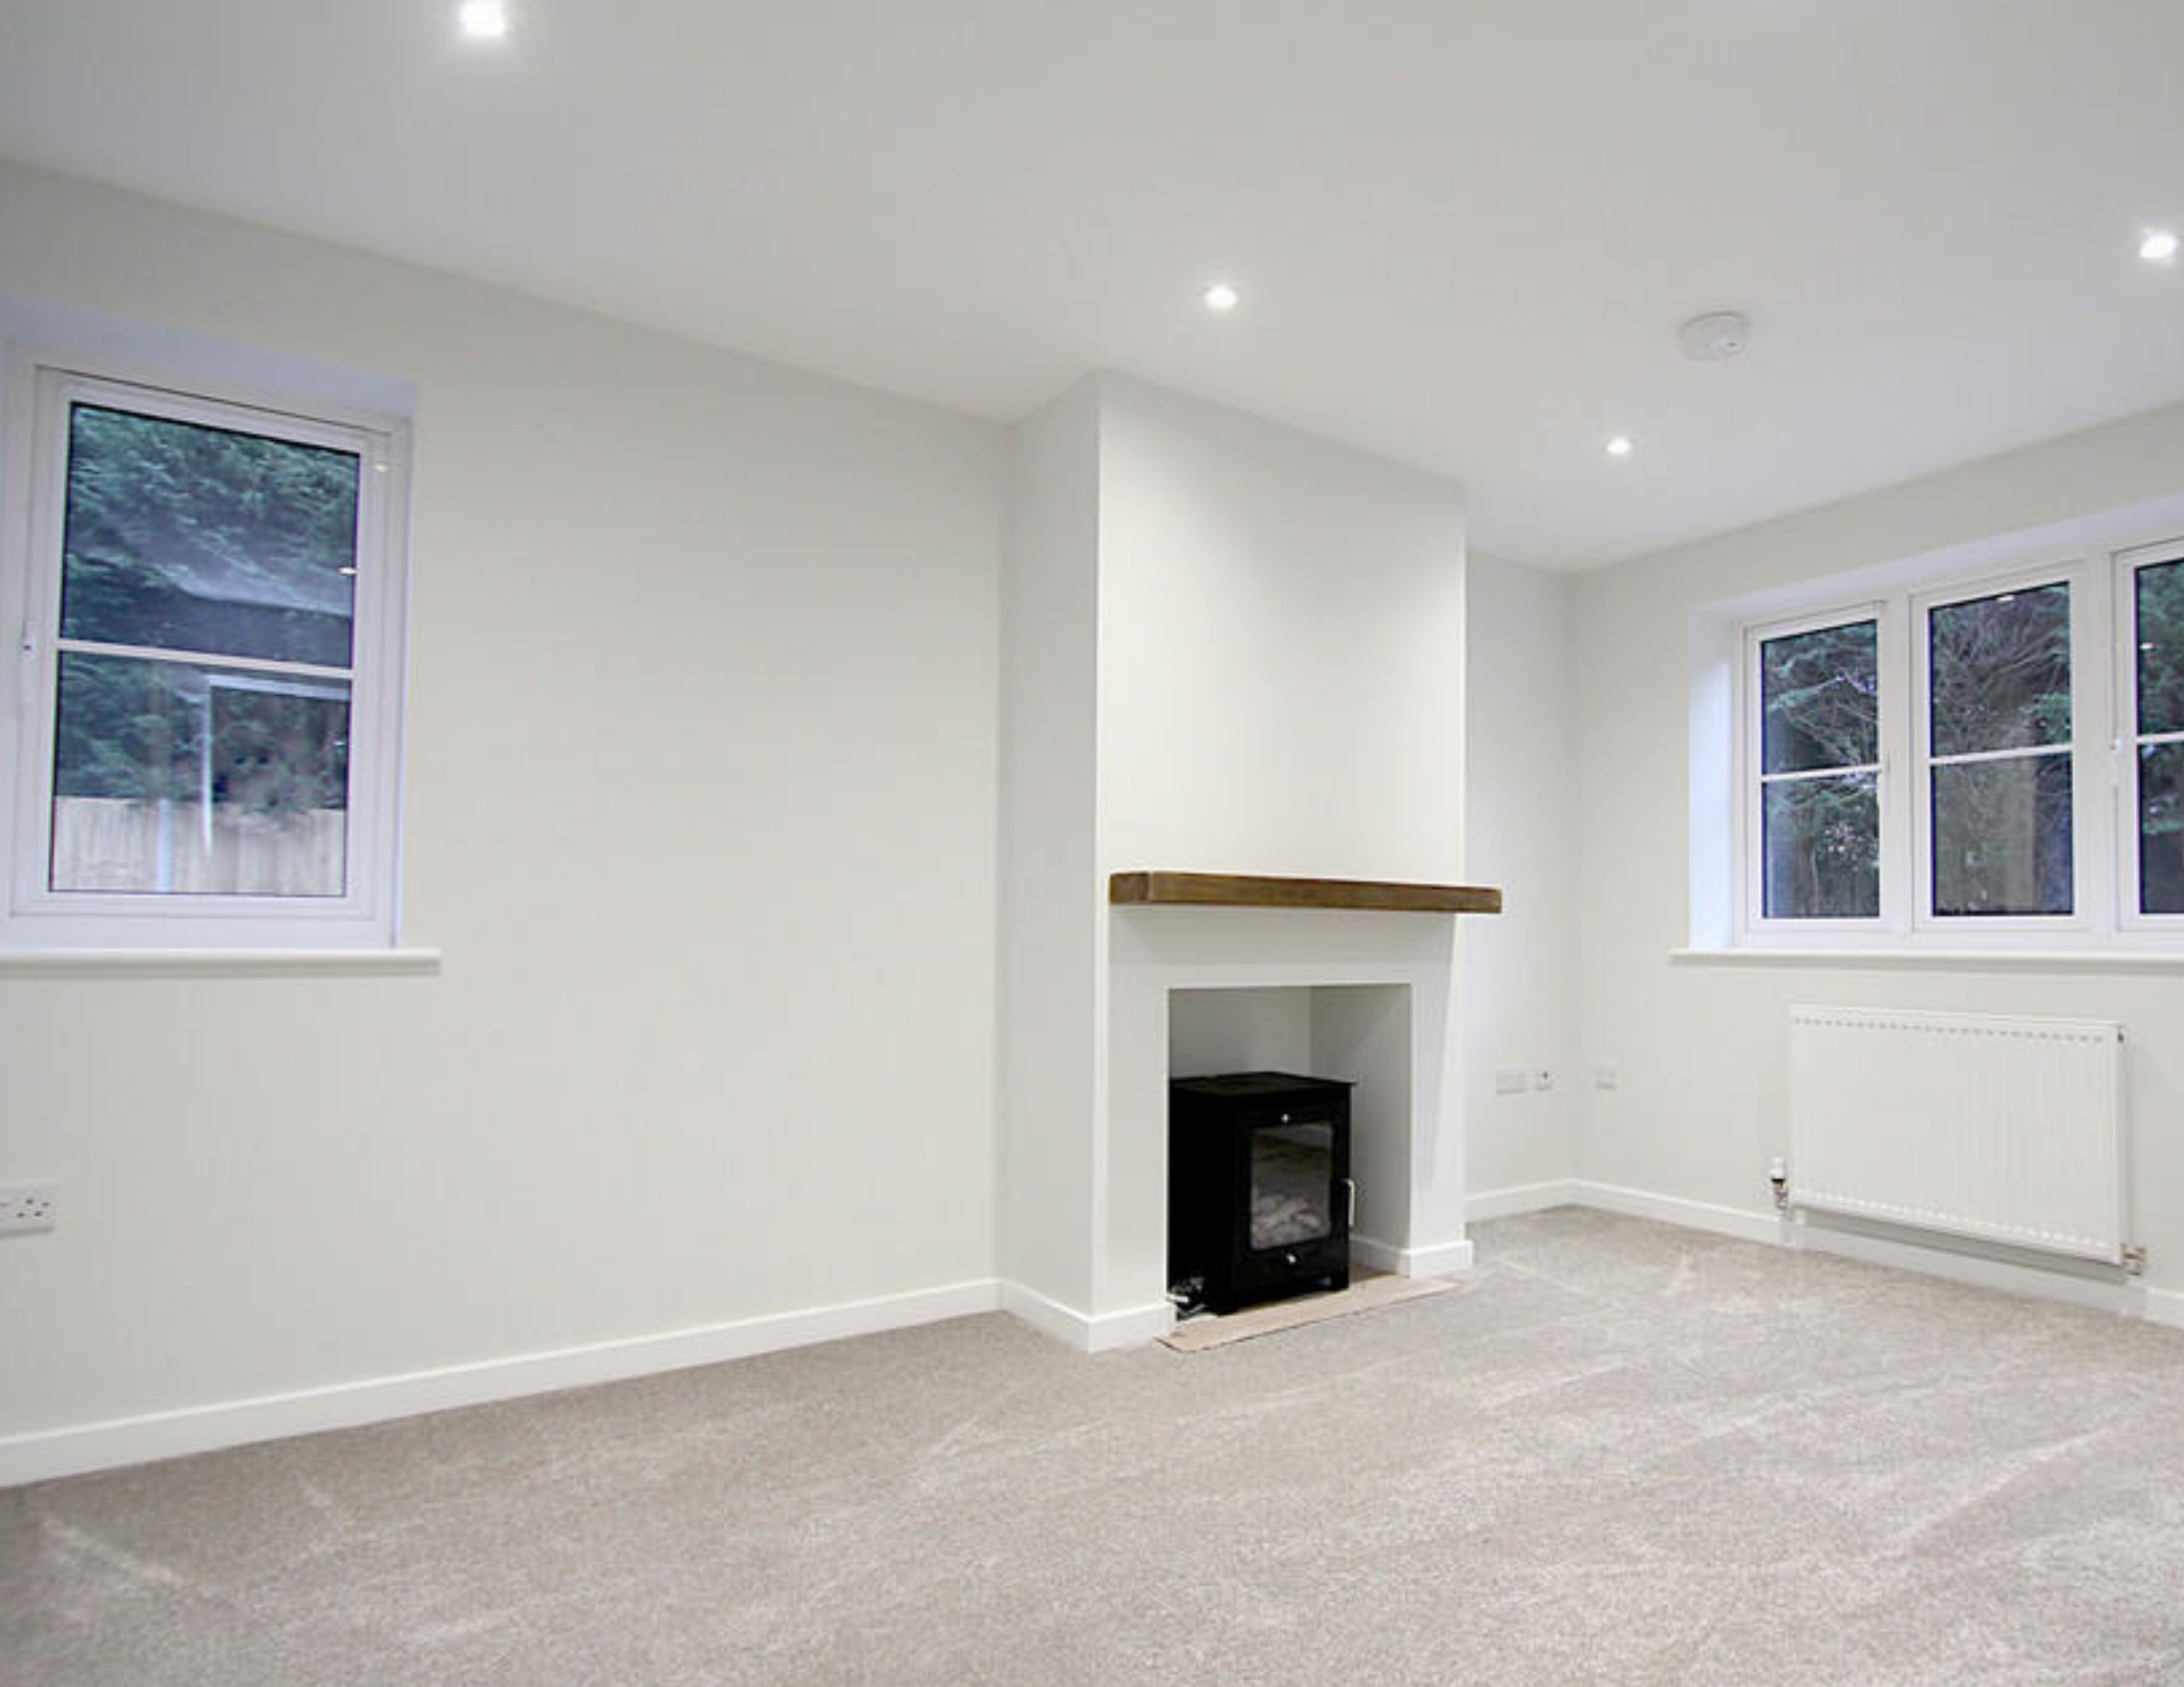 Living Room - Staged to Sell - Balsall Common - Before Image